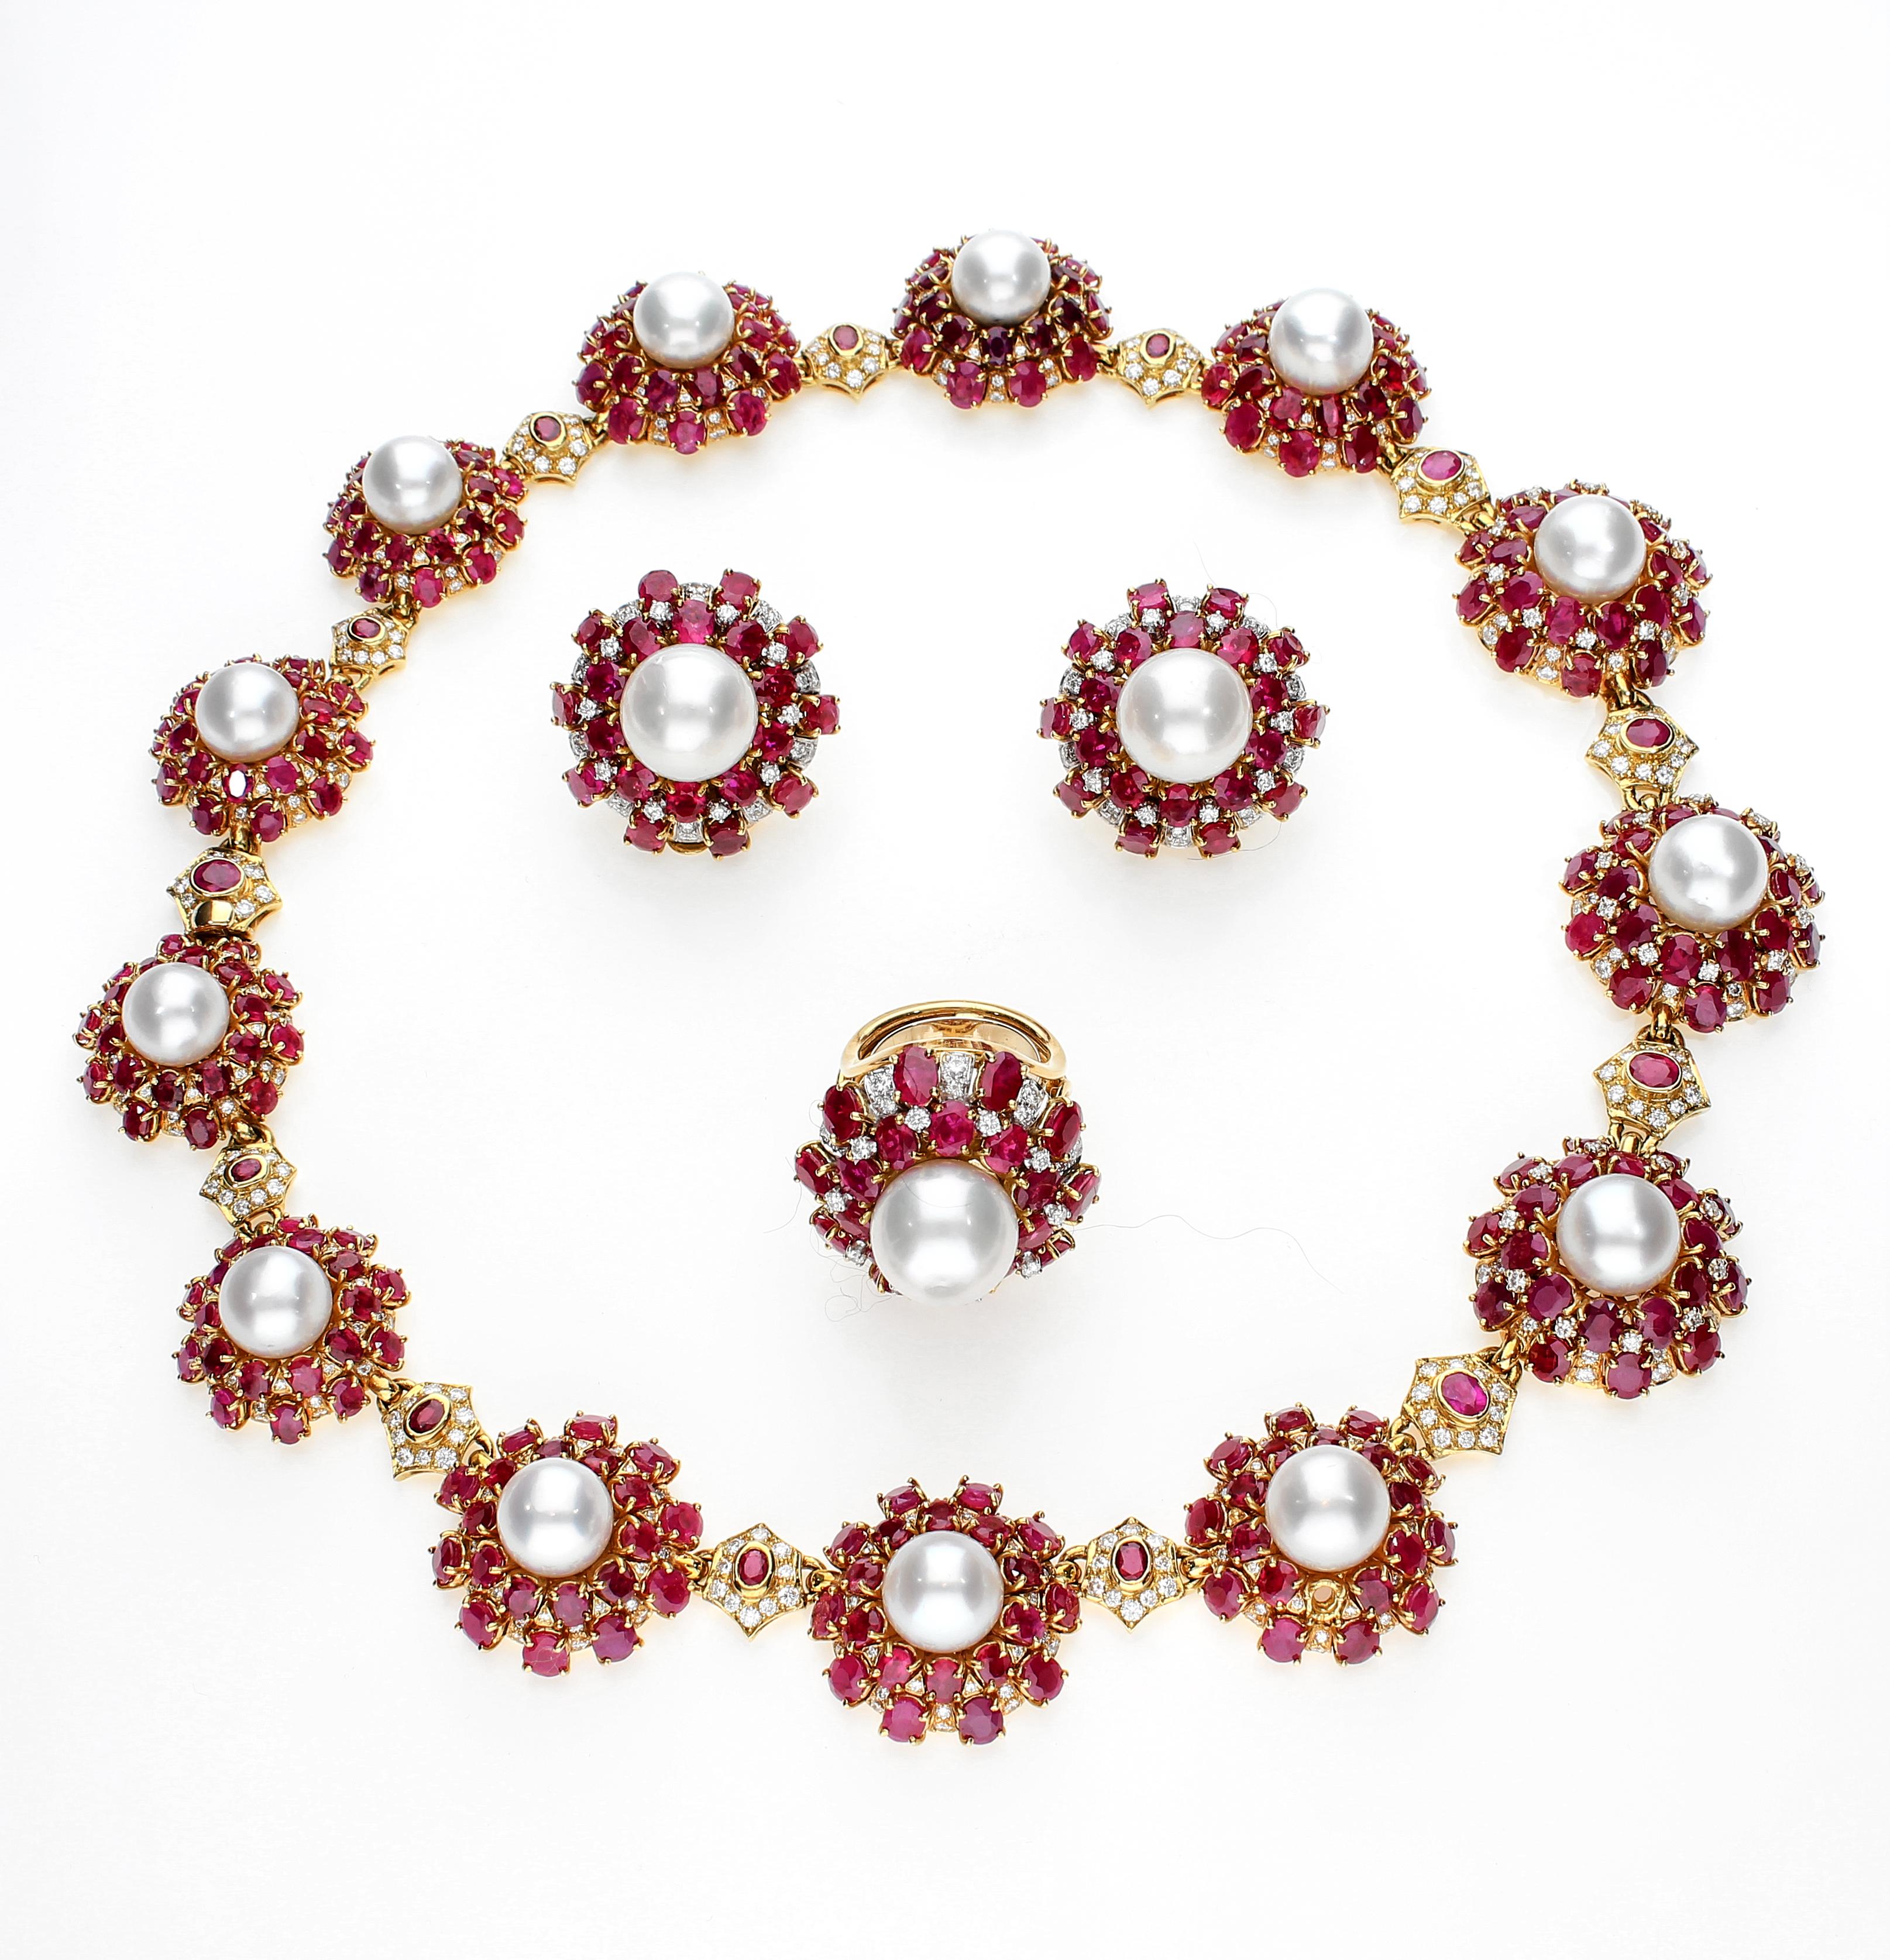 Necklace with Rubies, Pearls and Diamonds in 18 Karat Yellow Gold 11